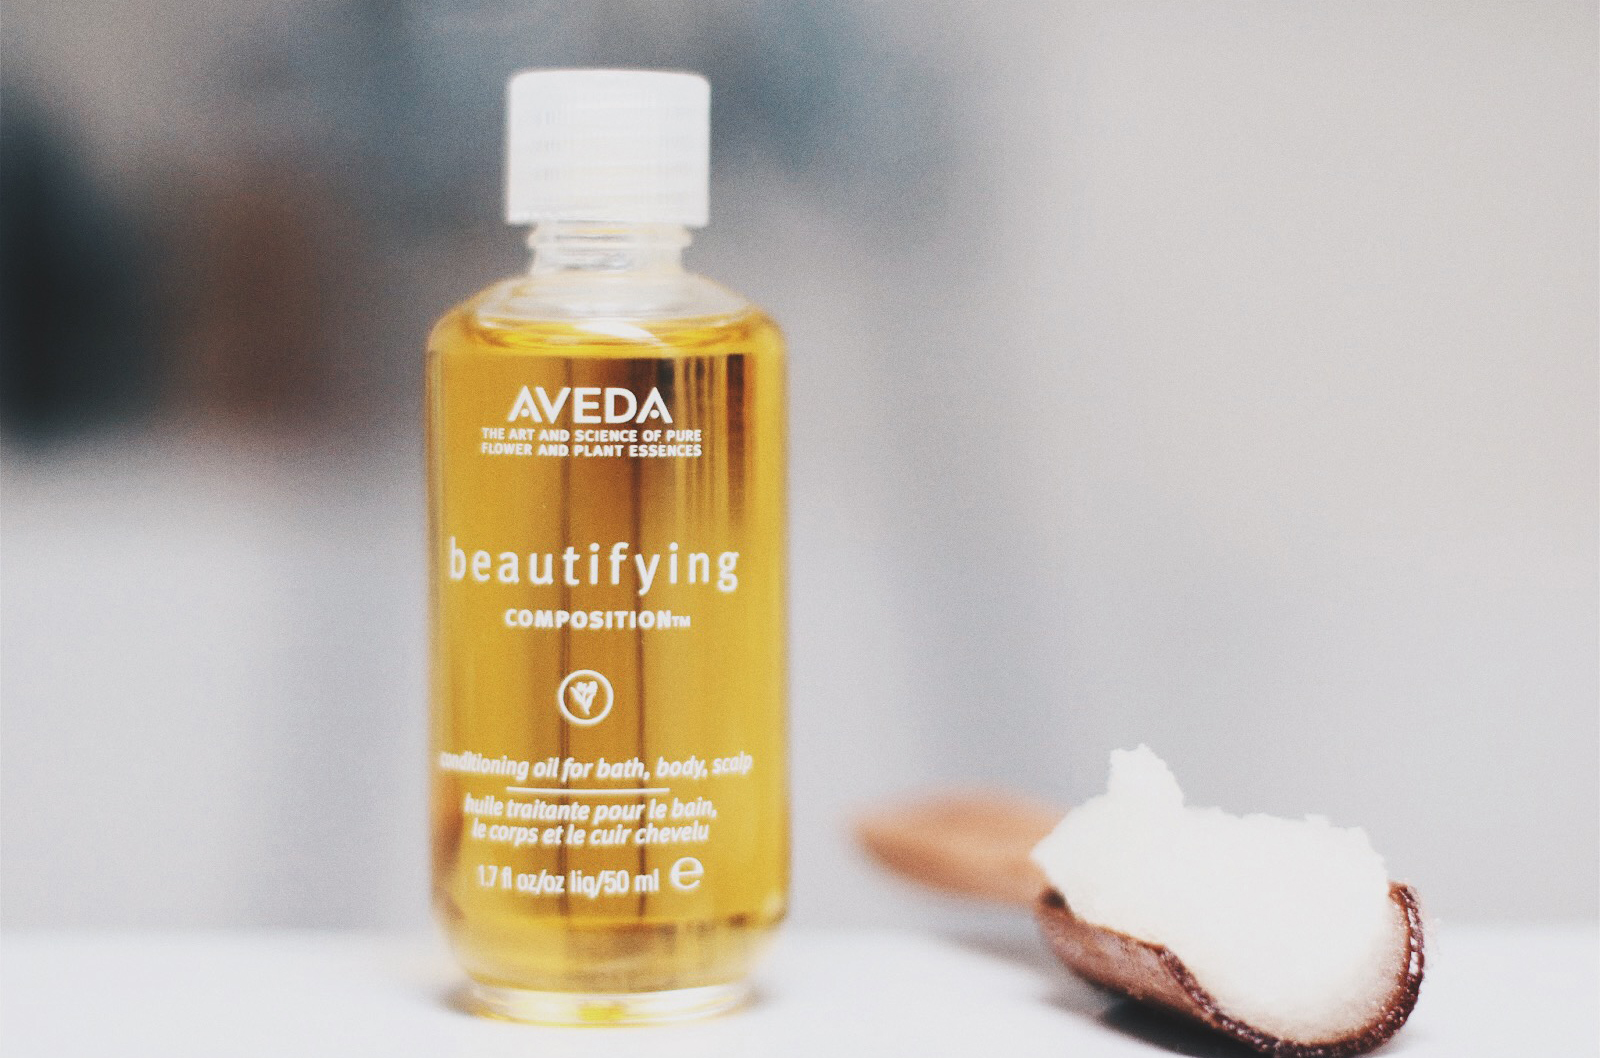 aveda beautifying huile corps cheveux bain gommage sels avis test